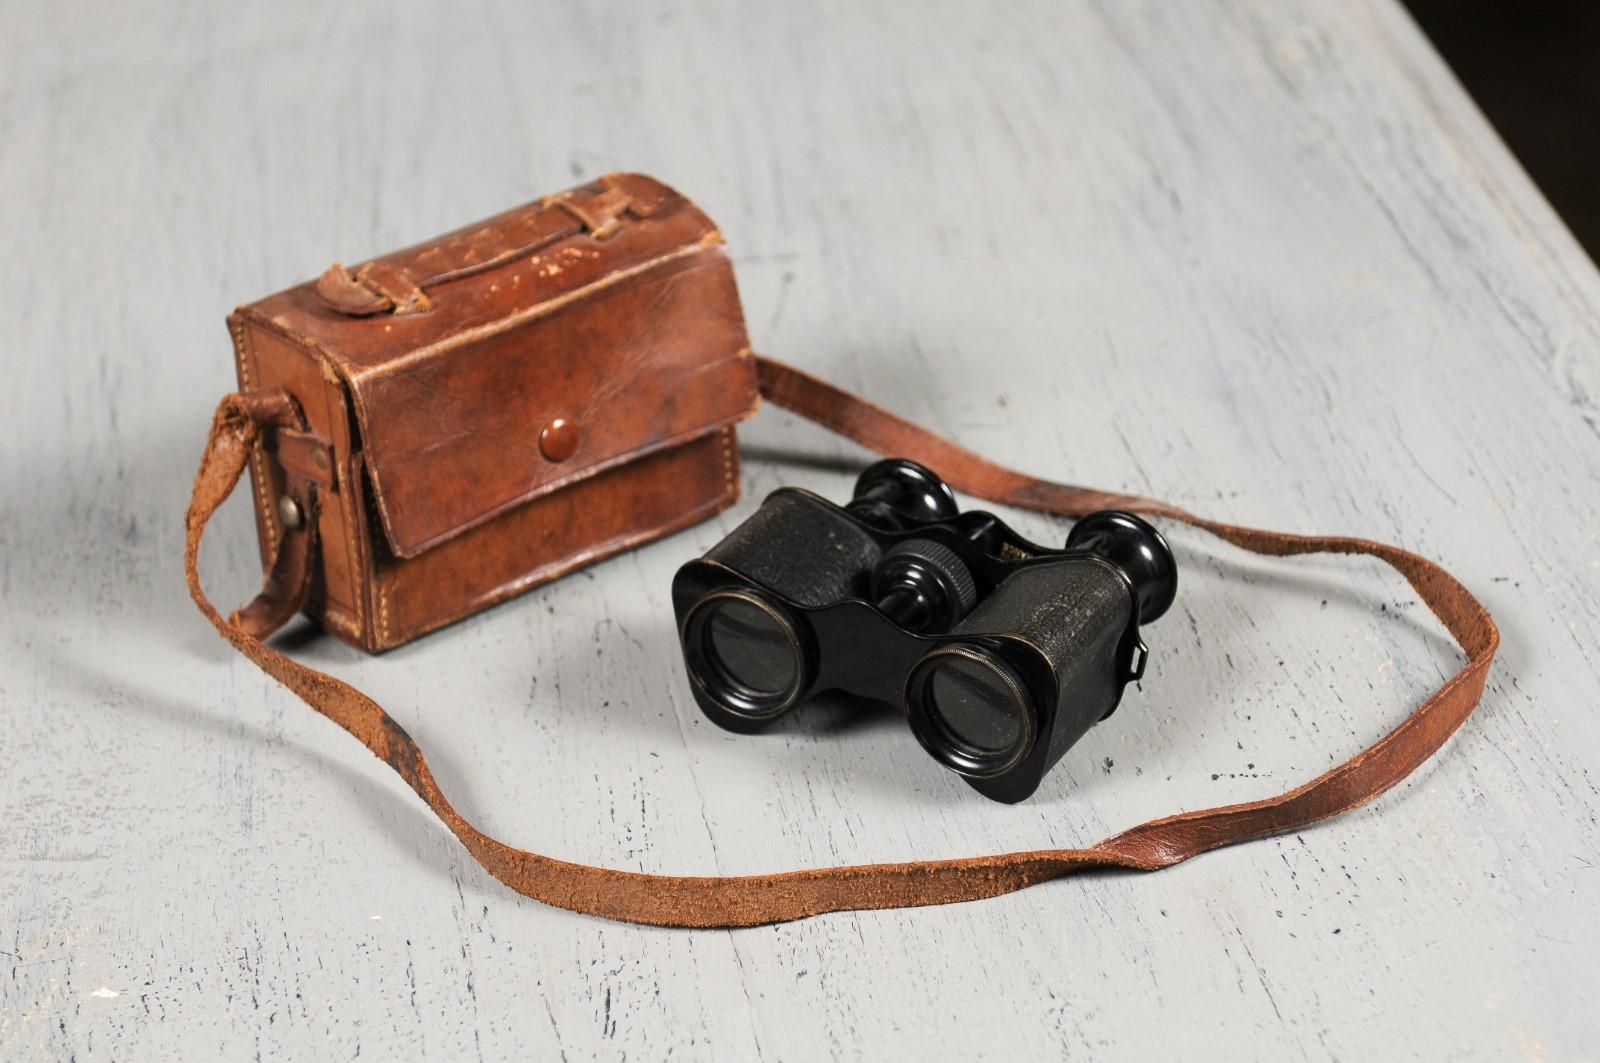 A pair of English Turn of the century binoculars from the early 20th century displayed in their original leather case. Born in England at the very end of Queen Victoria's reign, this pair of binoculars have made it all the way to us protected by